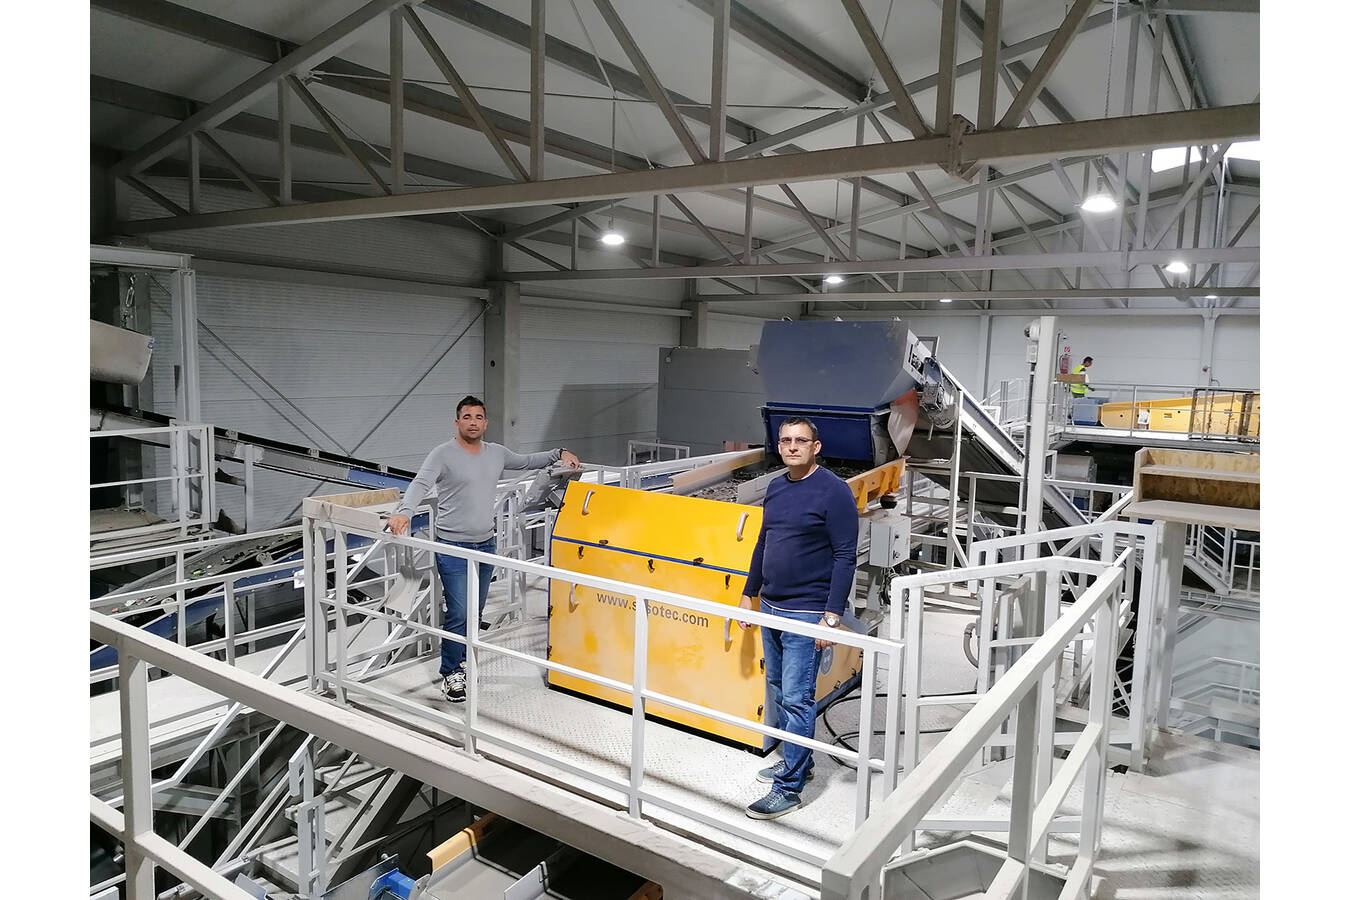 RE-Glass helps Hungary‘s glass recycling industry fit for the future Sorting systems for recovering high-quality, pure glass materials. Planned deposit system and circular economy drive development forward.